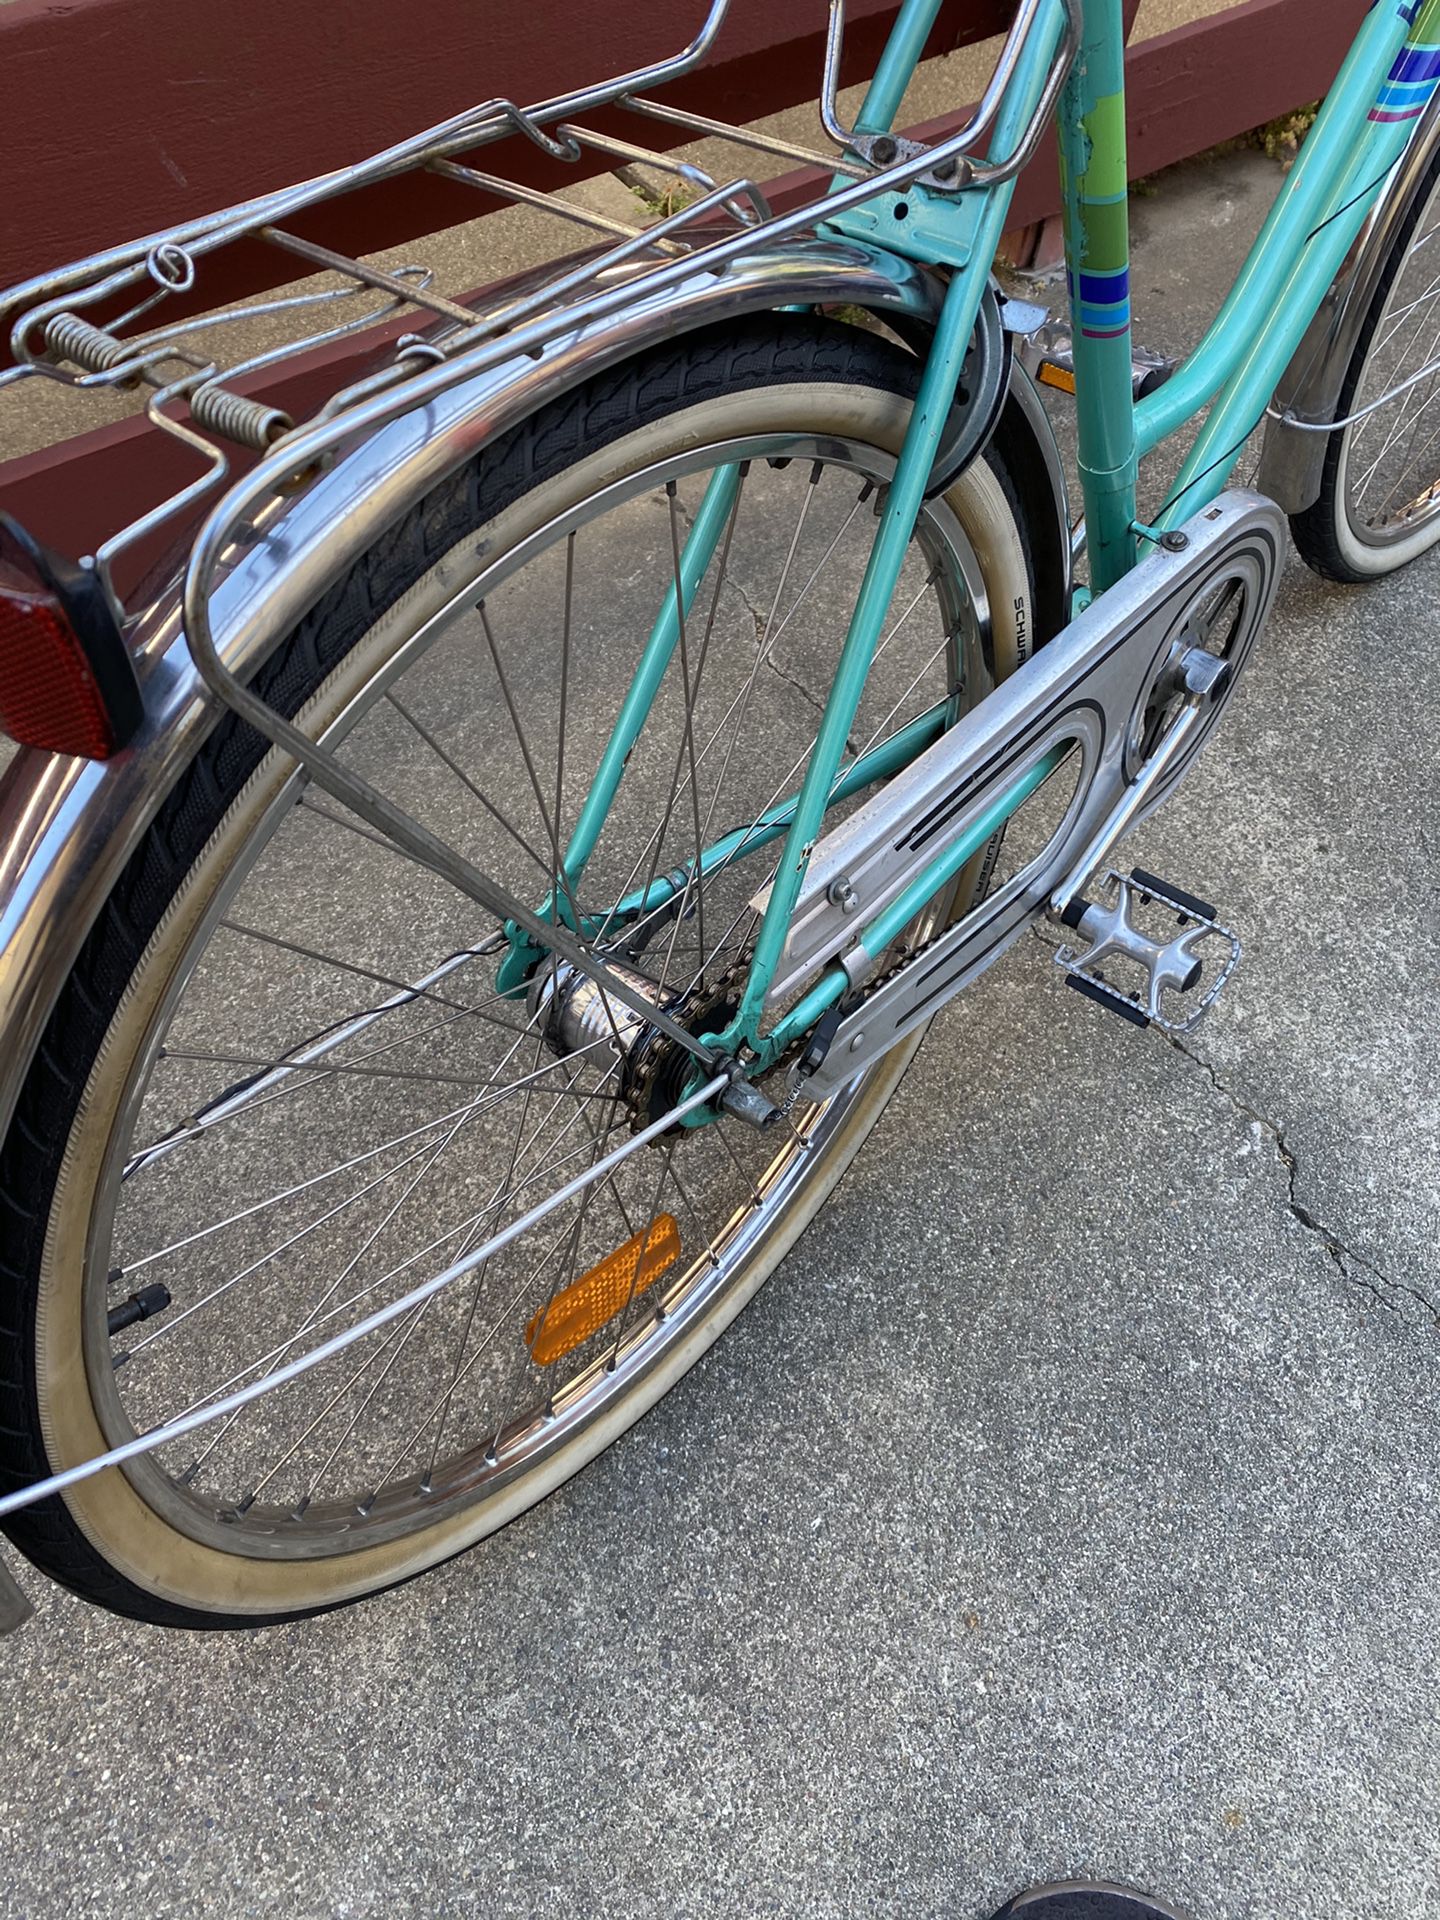 Hercules Cruiser Bike , really nice and good condition. Have front light systems, antique bike